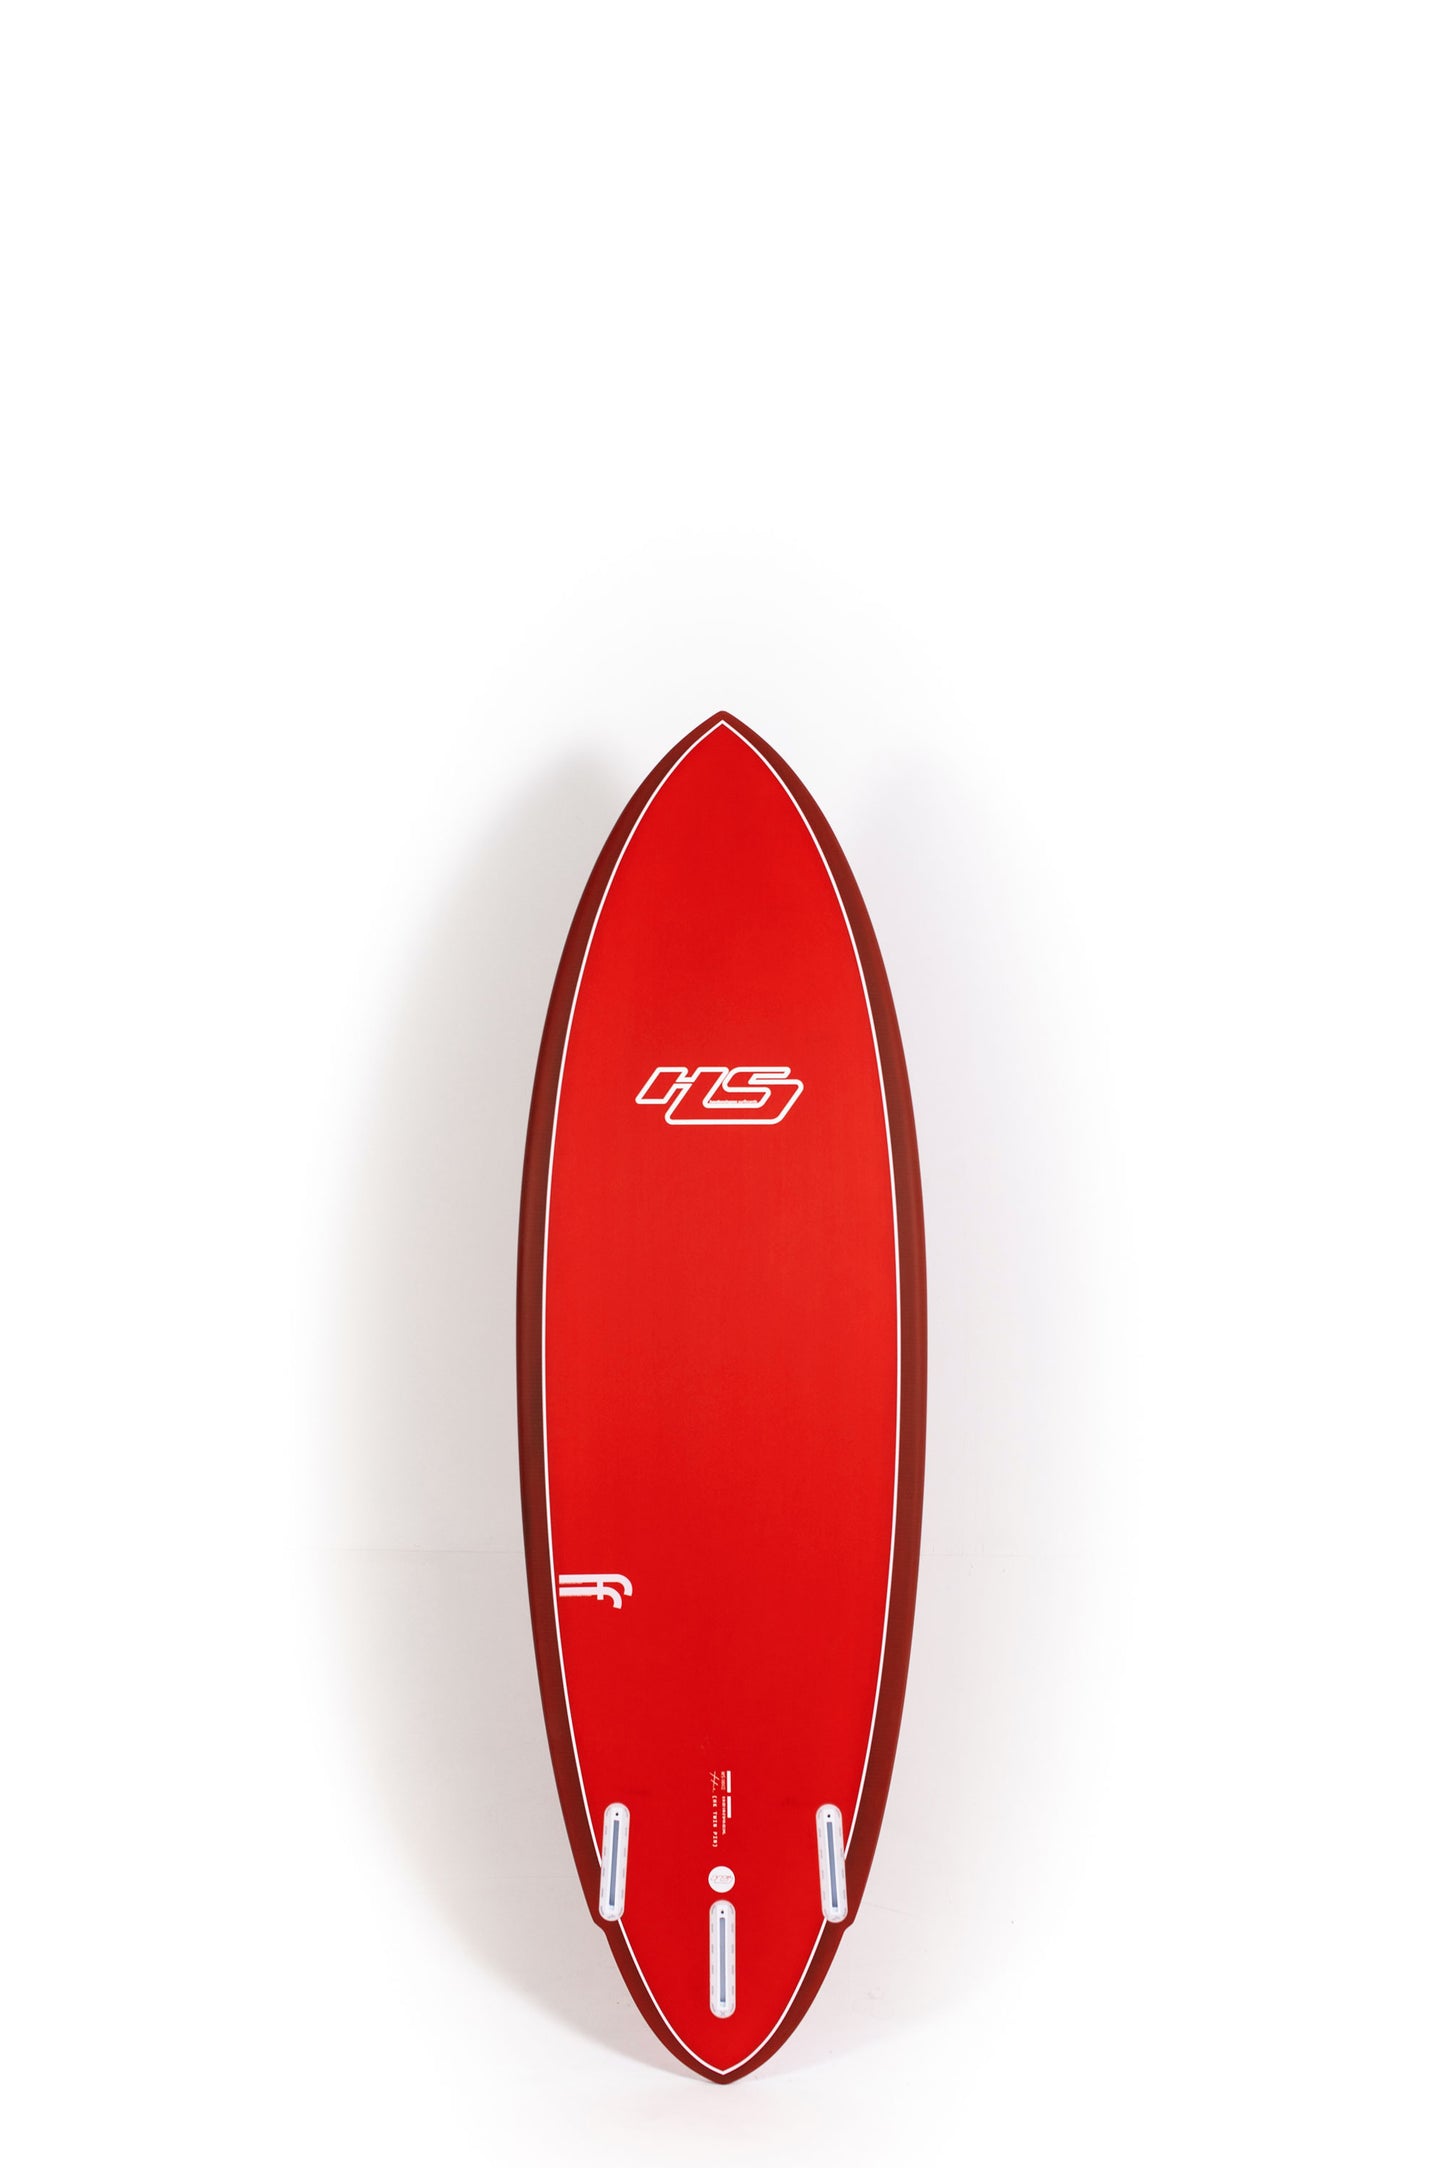 HAYDENSHAPES SURFBOARDS | Available online at PUKAS SURF SHOP